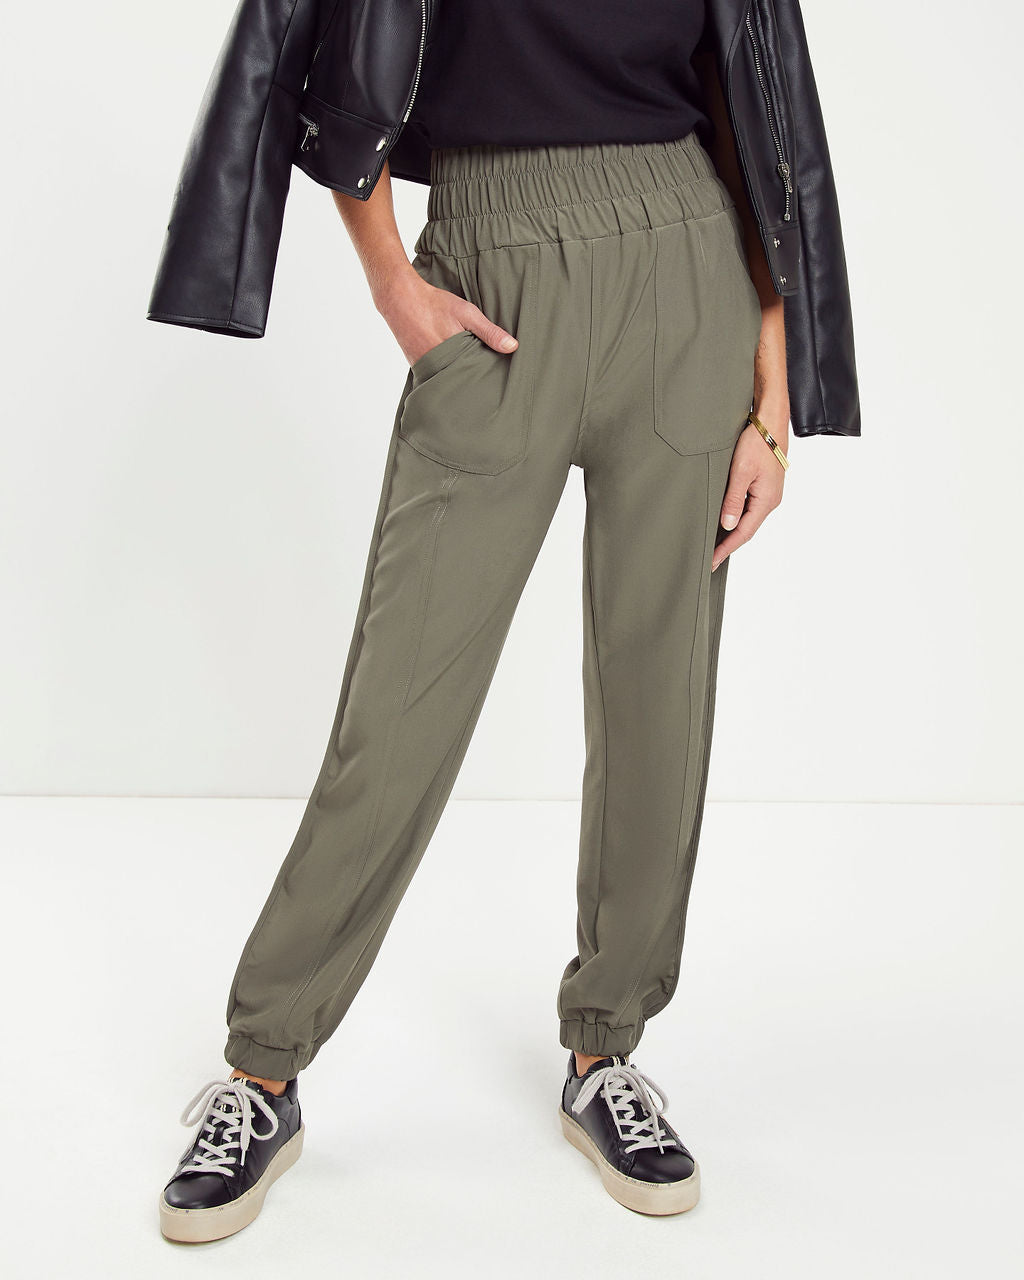 Chill Out Days Pocketed Jogger Pants - Olive